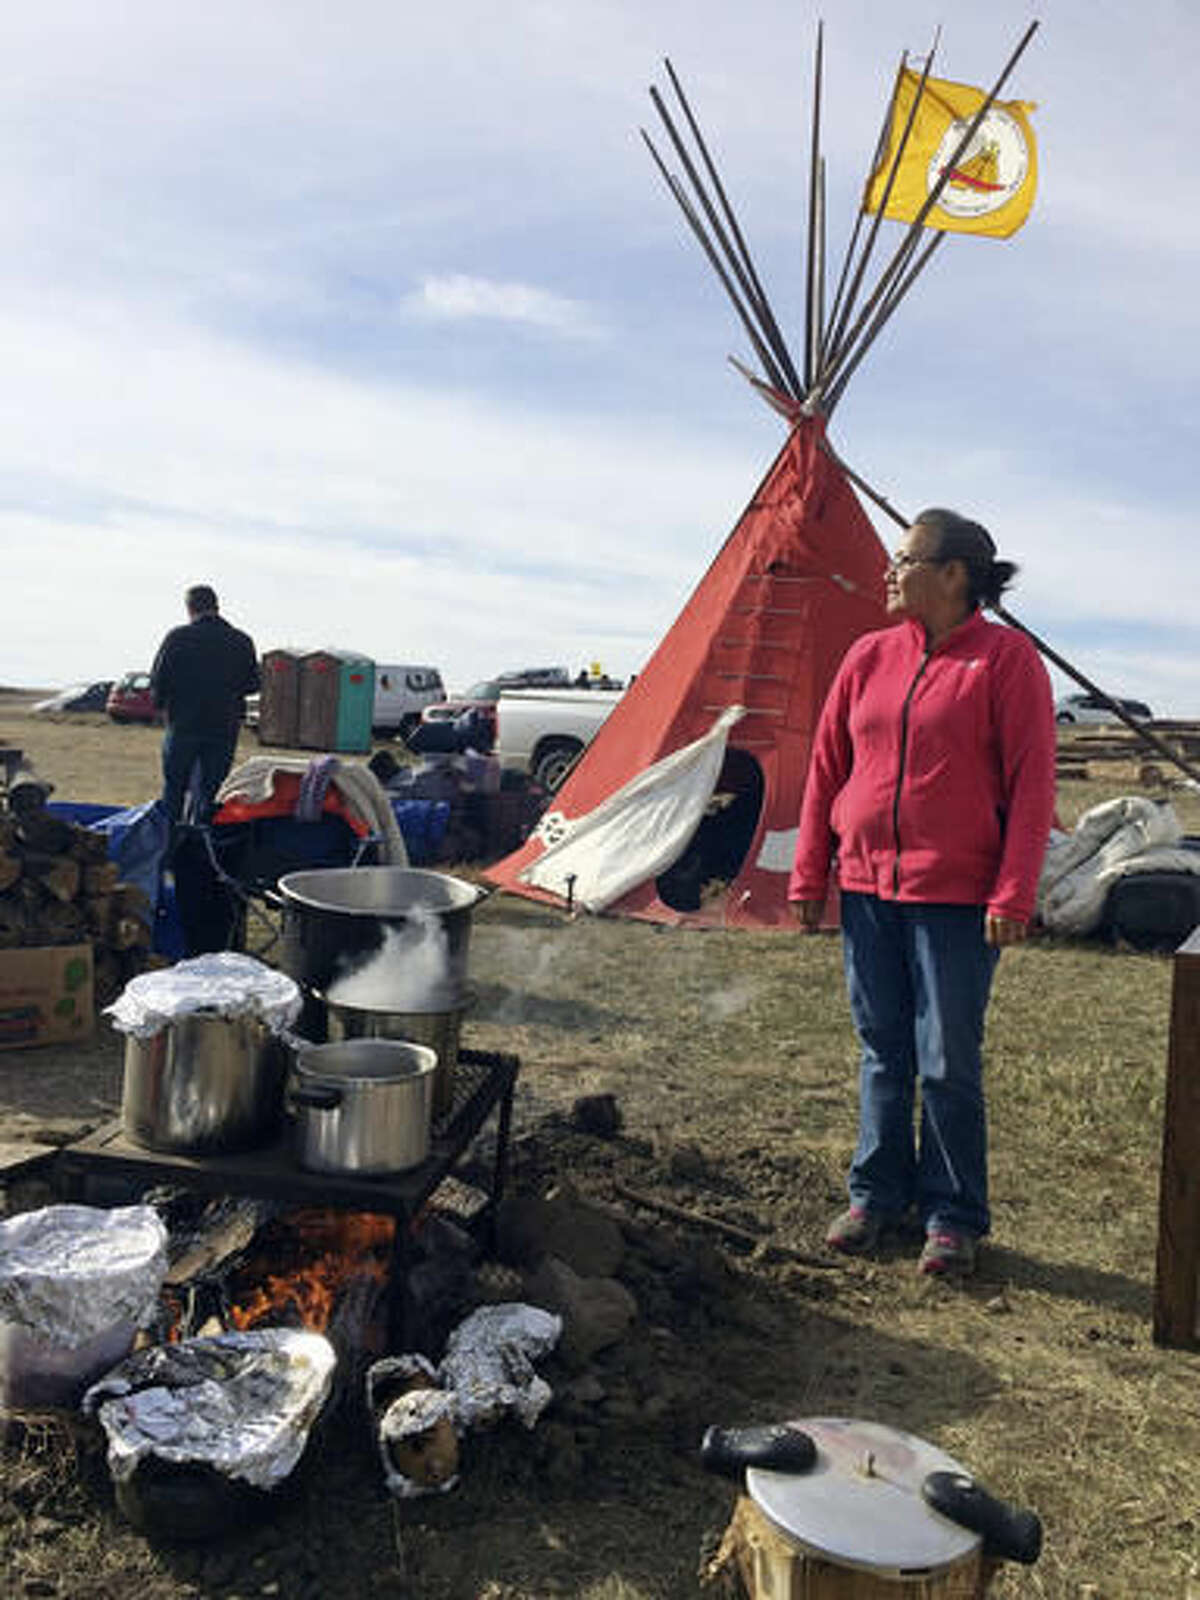 Mary Young Bear, of Tama, Iowa, cooks buffalo and potatoes over a campfire Monday, Oct. 24, 2016, at the Dakota Access oil pipeline protest in southern North Dakota. The long-running dispute over the Dakota Access oil pipeline expanded to private land recently purchased by the pipeline builders, with protesters who say the area rightfully belongs to Native Americans setting up camp and vowing to stay put until the project is stopped. (AP Photo/Blake Nicholson)